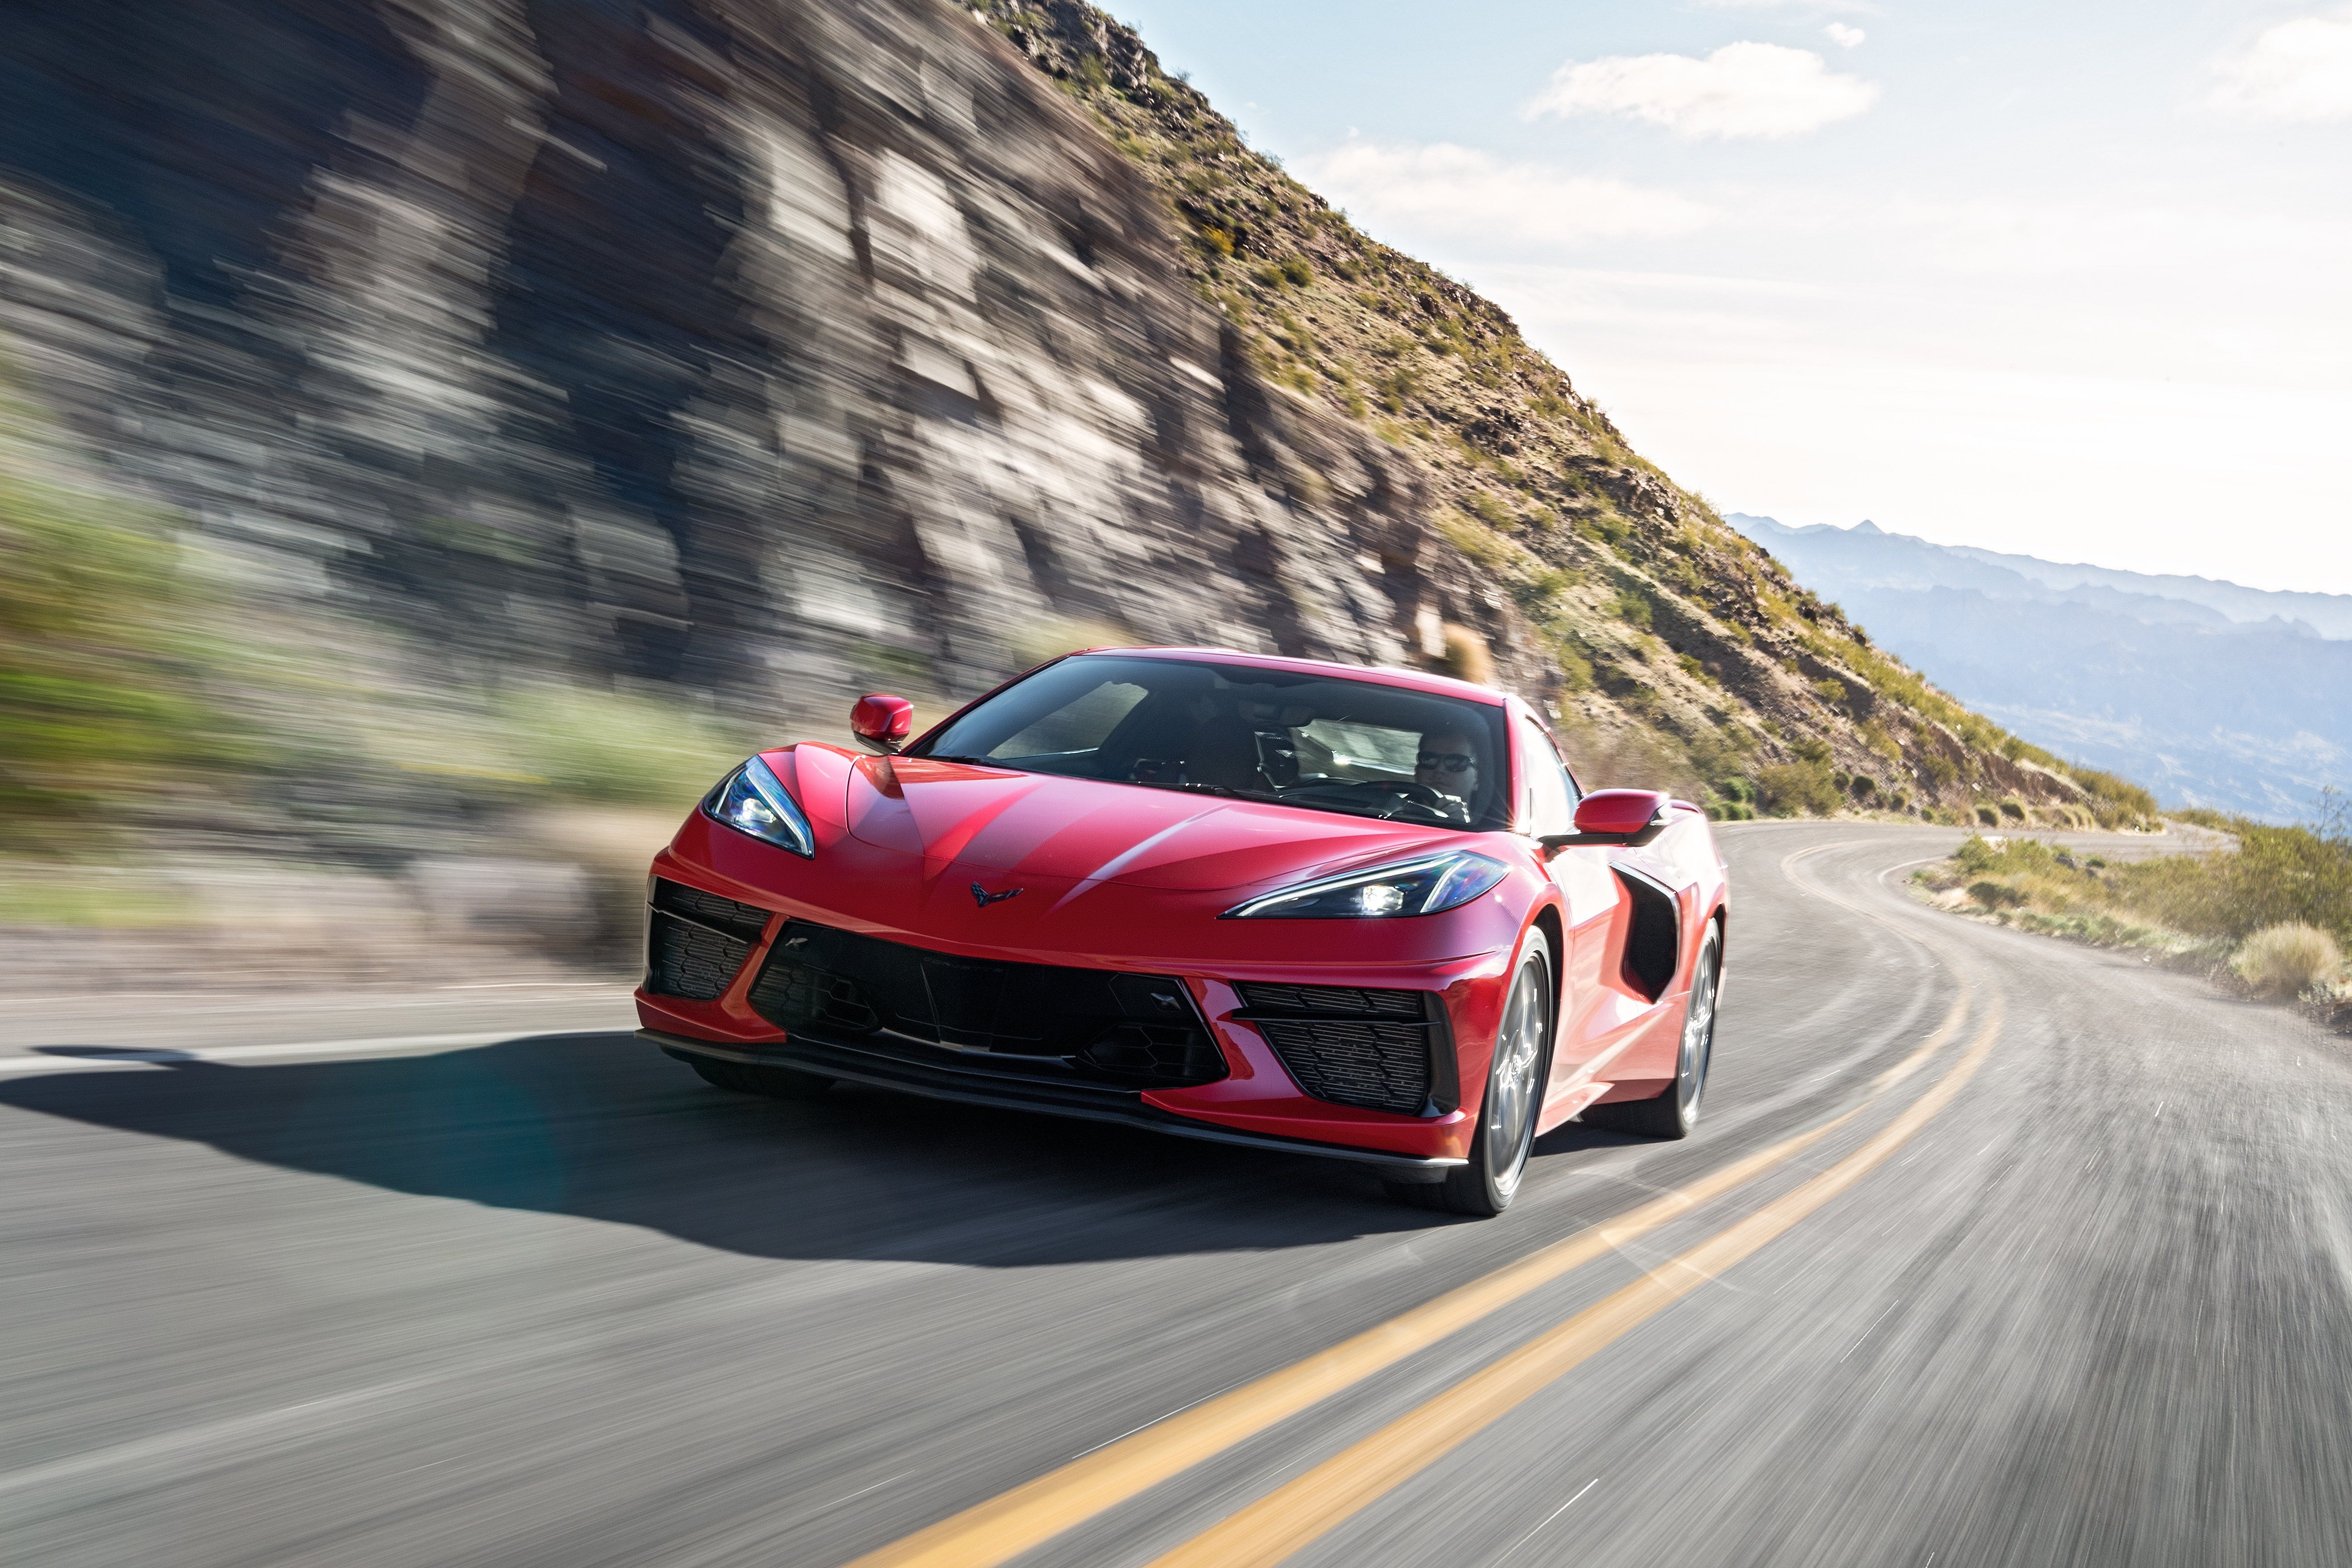 Corvette Stingray: Costs, Facts and Figures